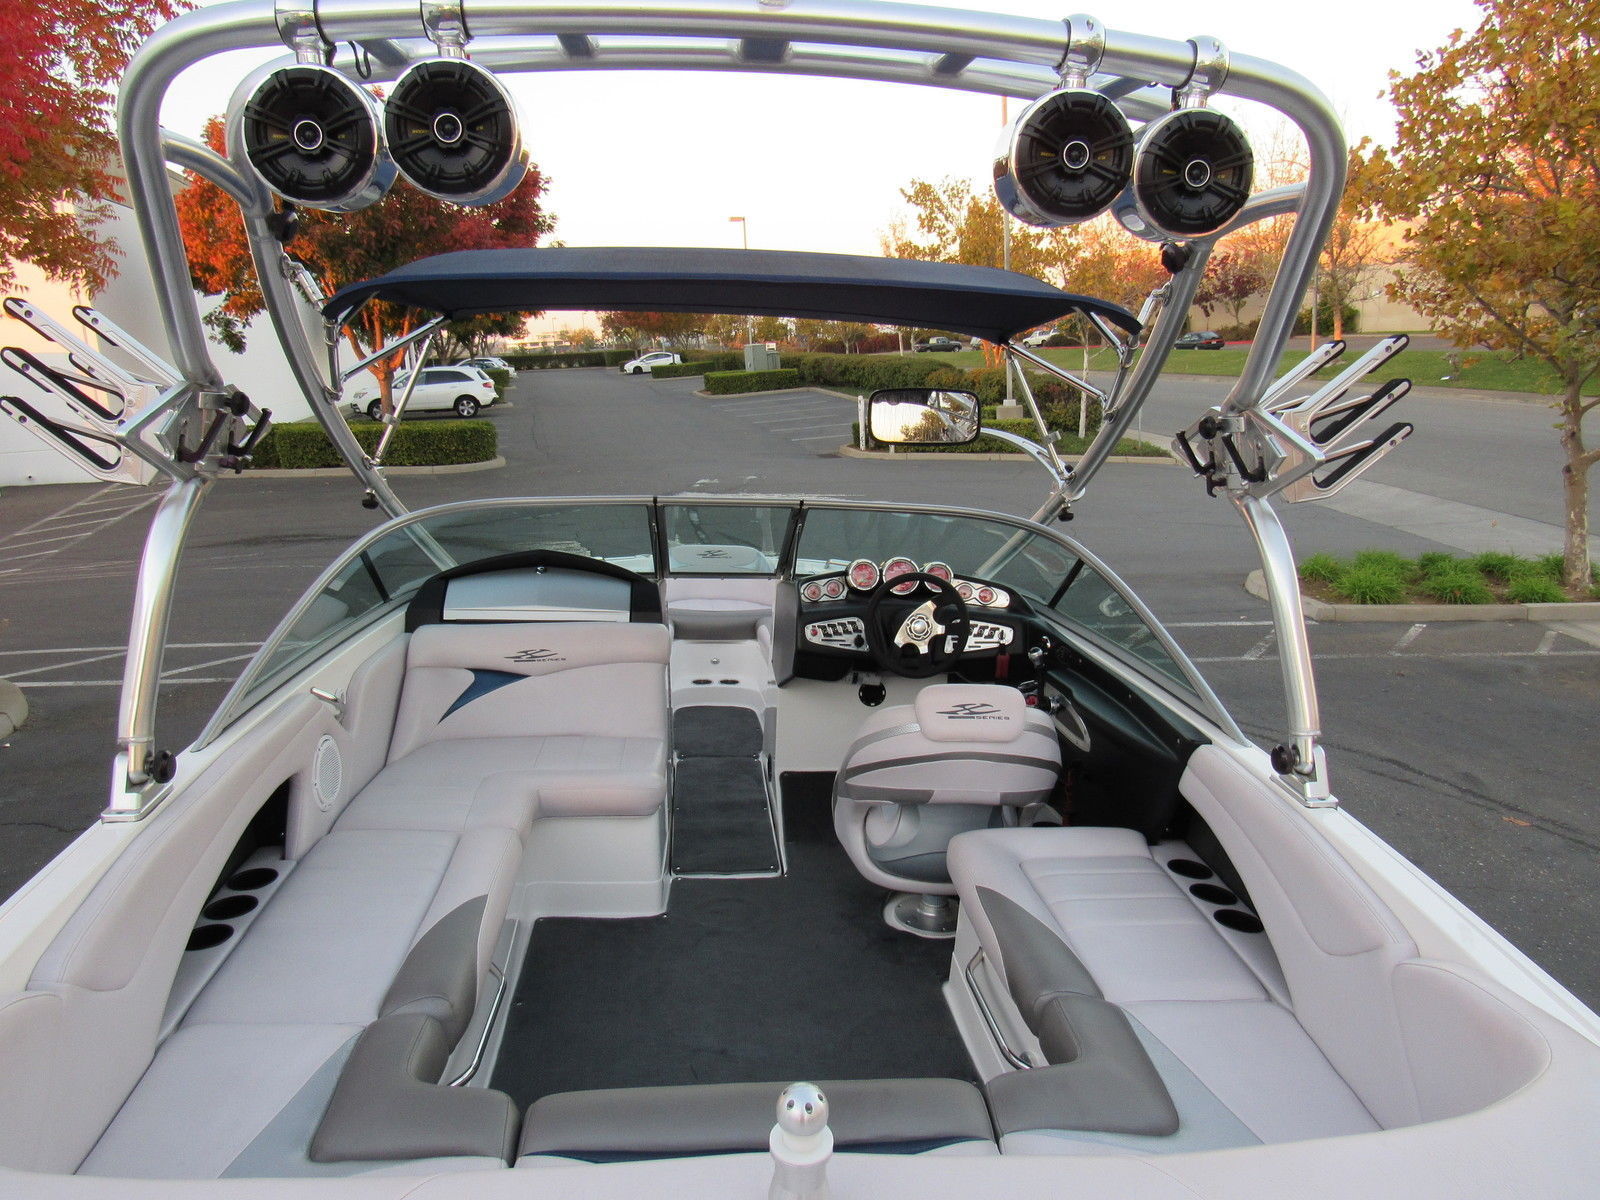 Mastercraft X15 2007 for sale for $16,000 - Boats-from-USA.com